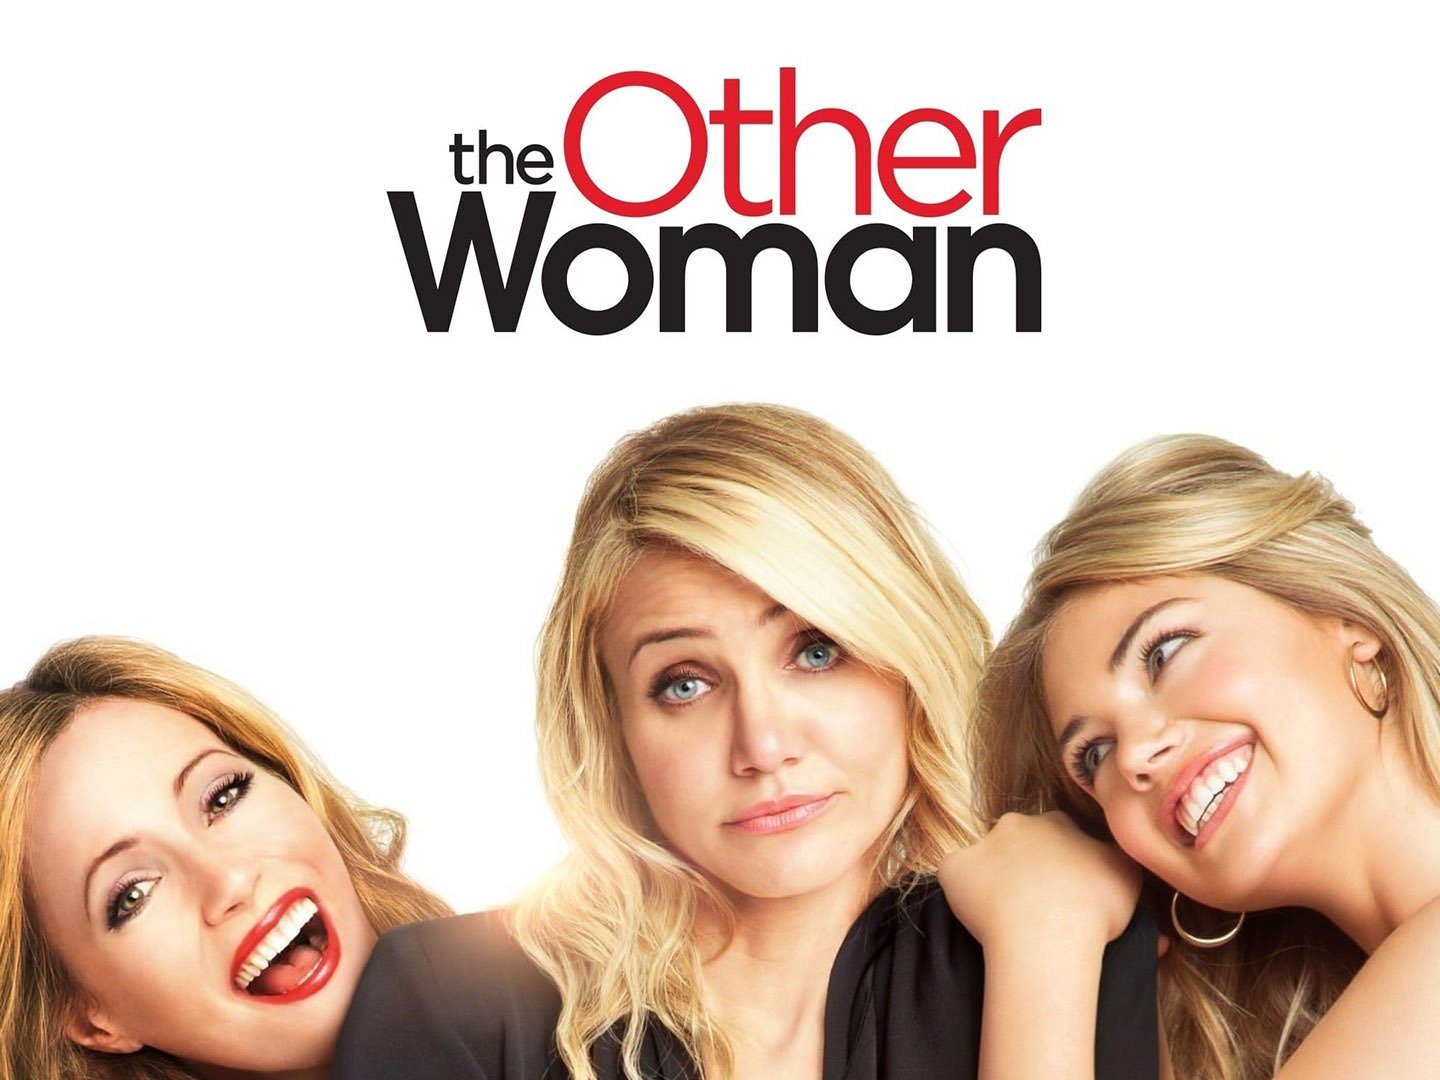 The Other Woman Trailer 1 Trailers & Videos Rotten Tomatoes